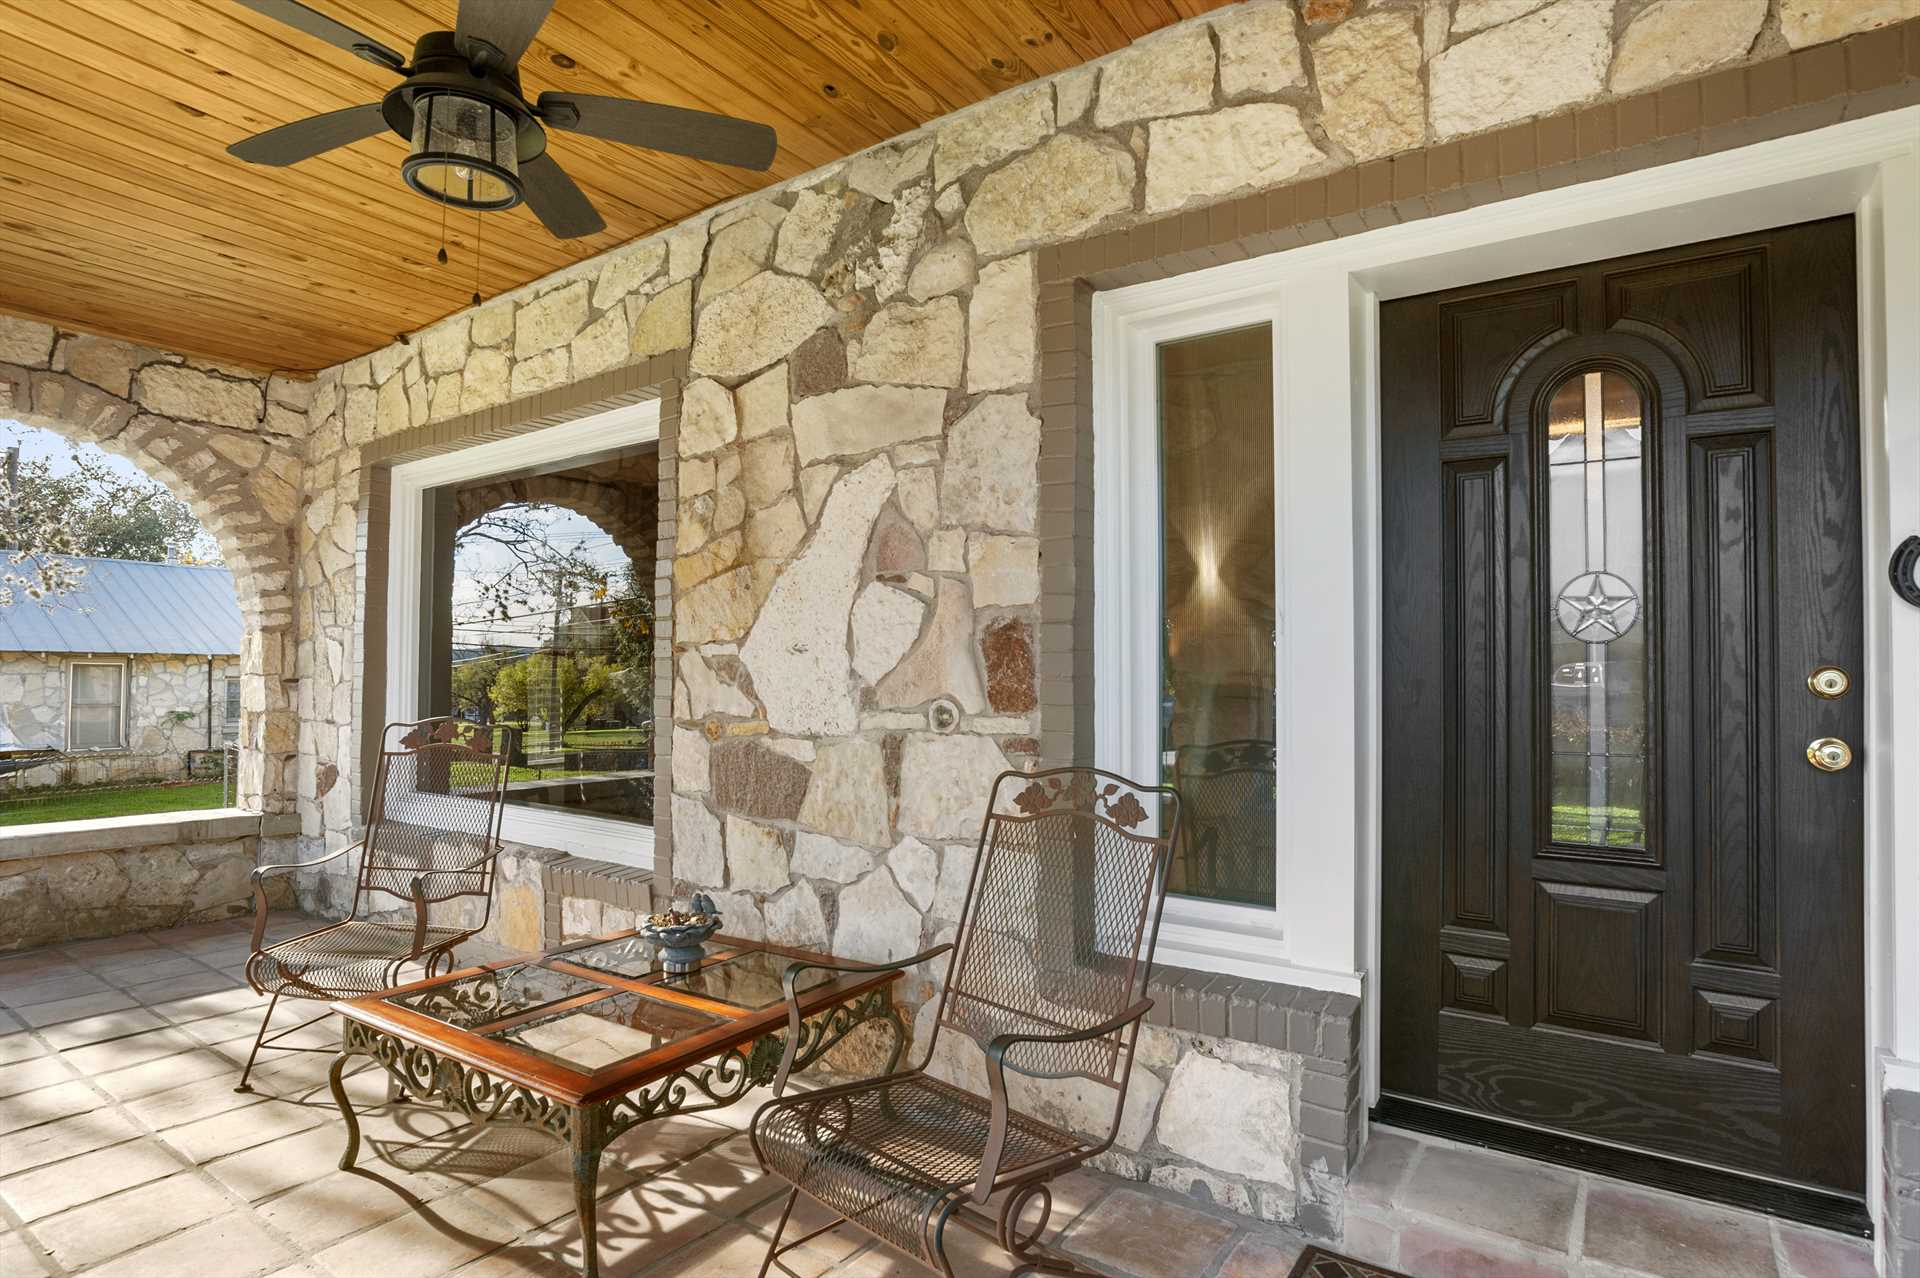                                                 The front patio is nicely shaded, with a ceiling fan to stir up a fresh breeze if you need one!